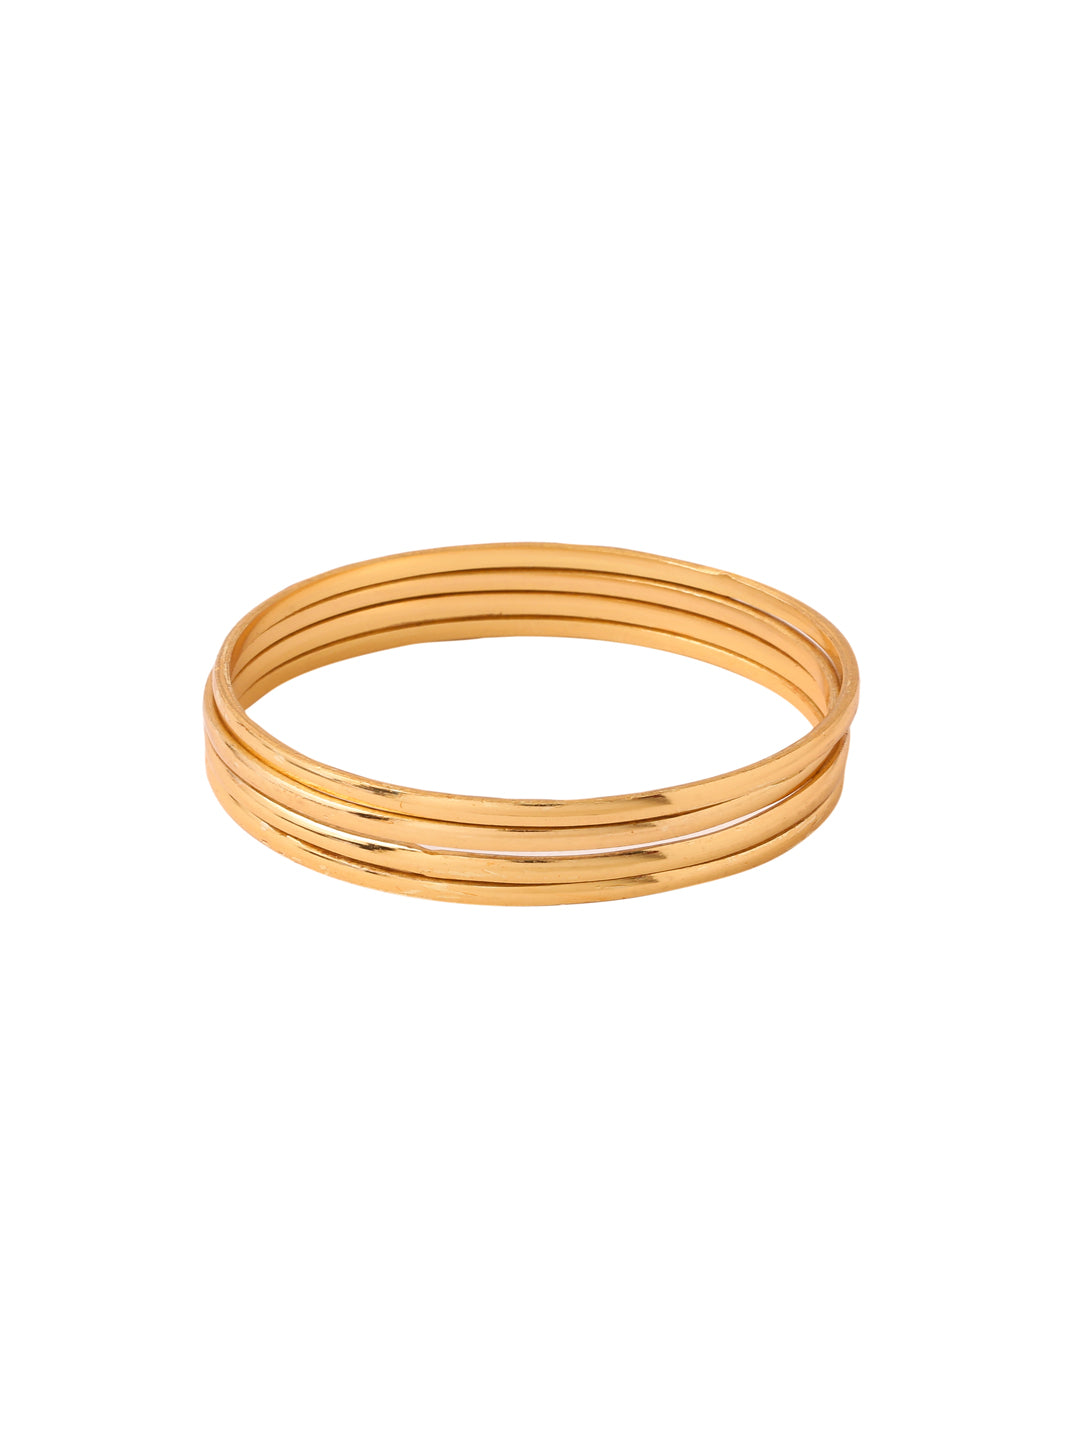 Women's Set Of 4 Gold-Plated Traditional Daily use Bangles - NVR